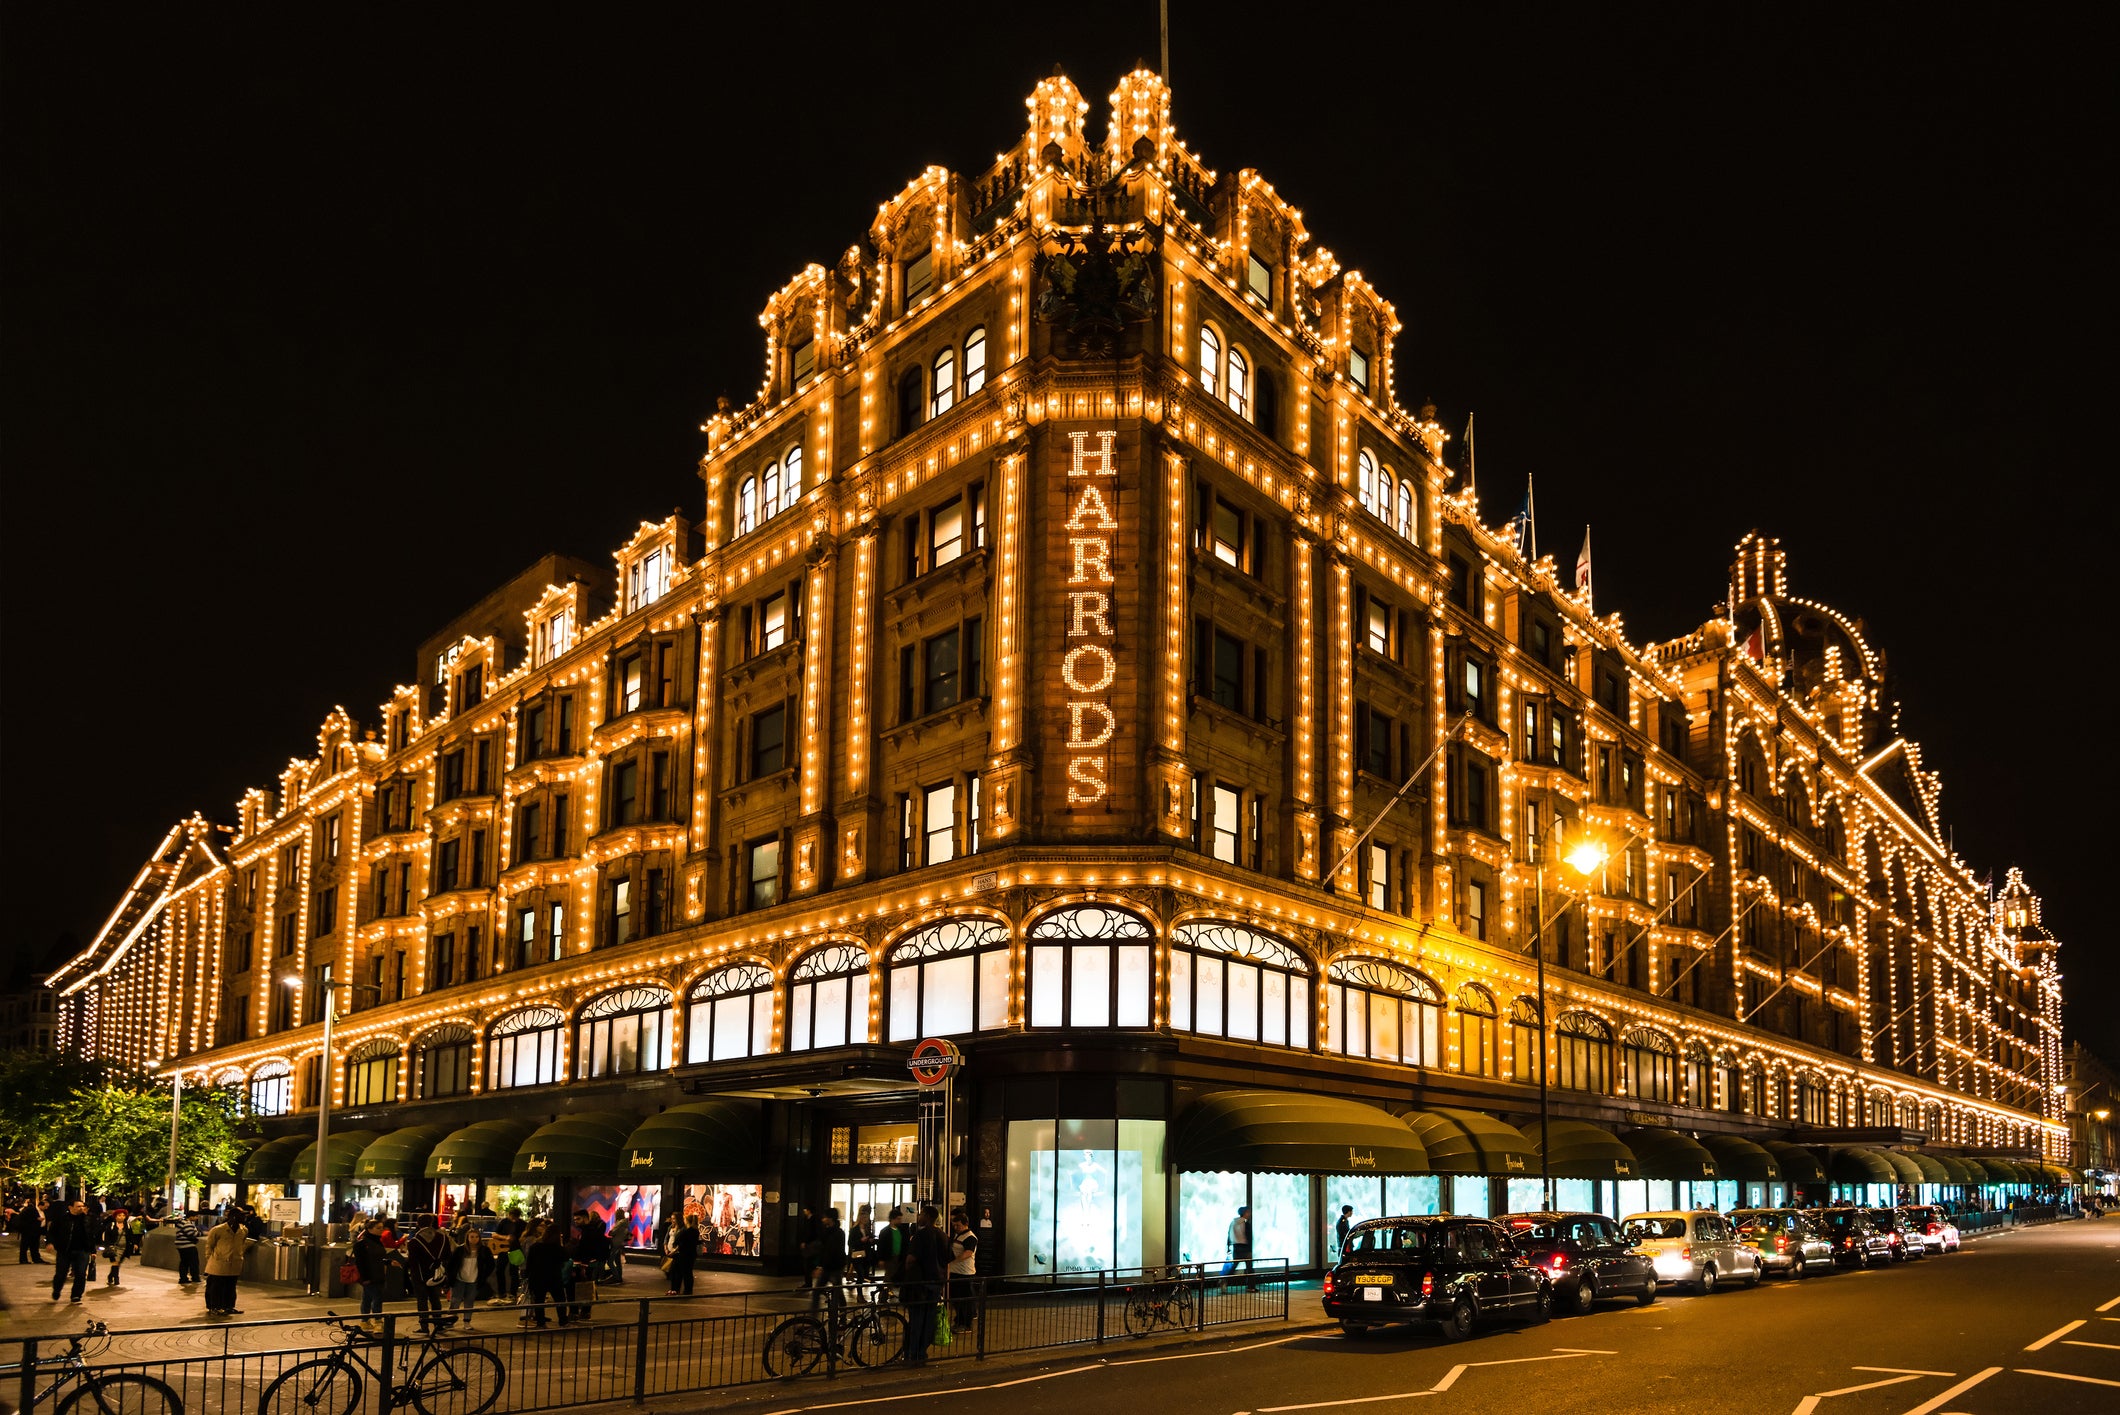 Harrod’s ‘Christmas World’ is unrivalled for floor-to-ceiling decorations this December